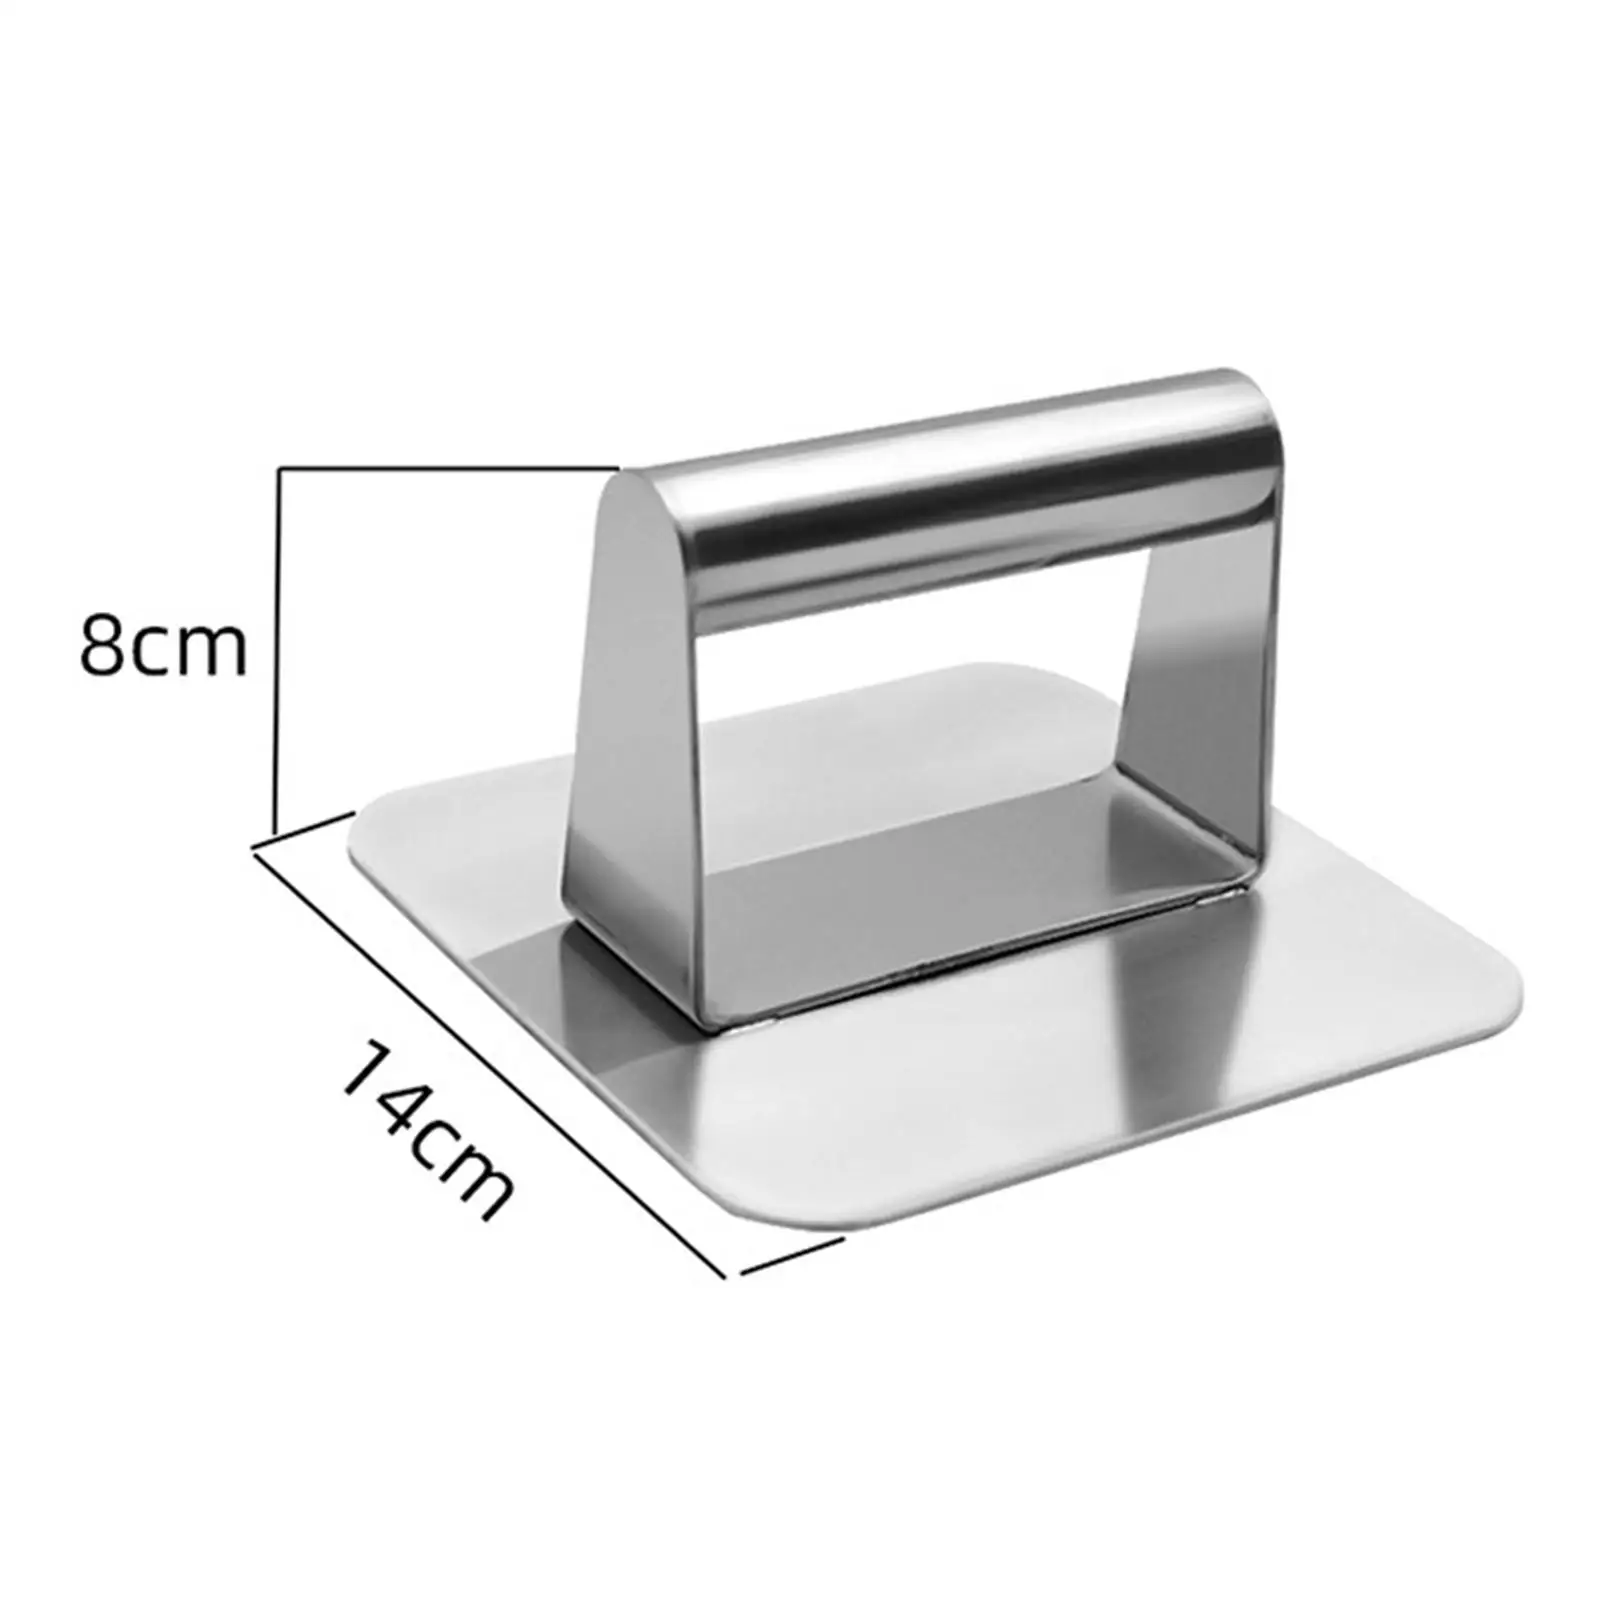 304 Stainless Steel Burger Press Manual Baking Tools Hamburger Patty Square Grill Press for Steaks Meat Beef Cooking